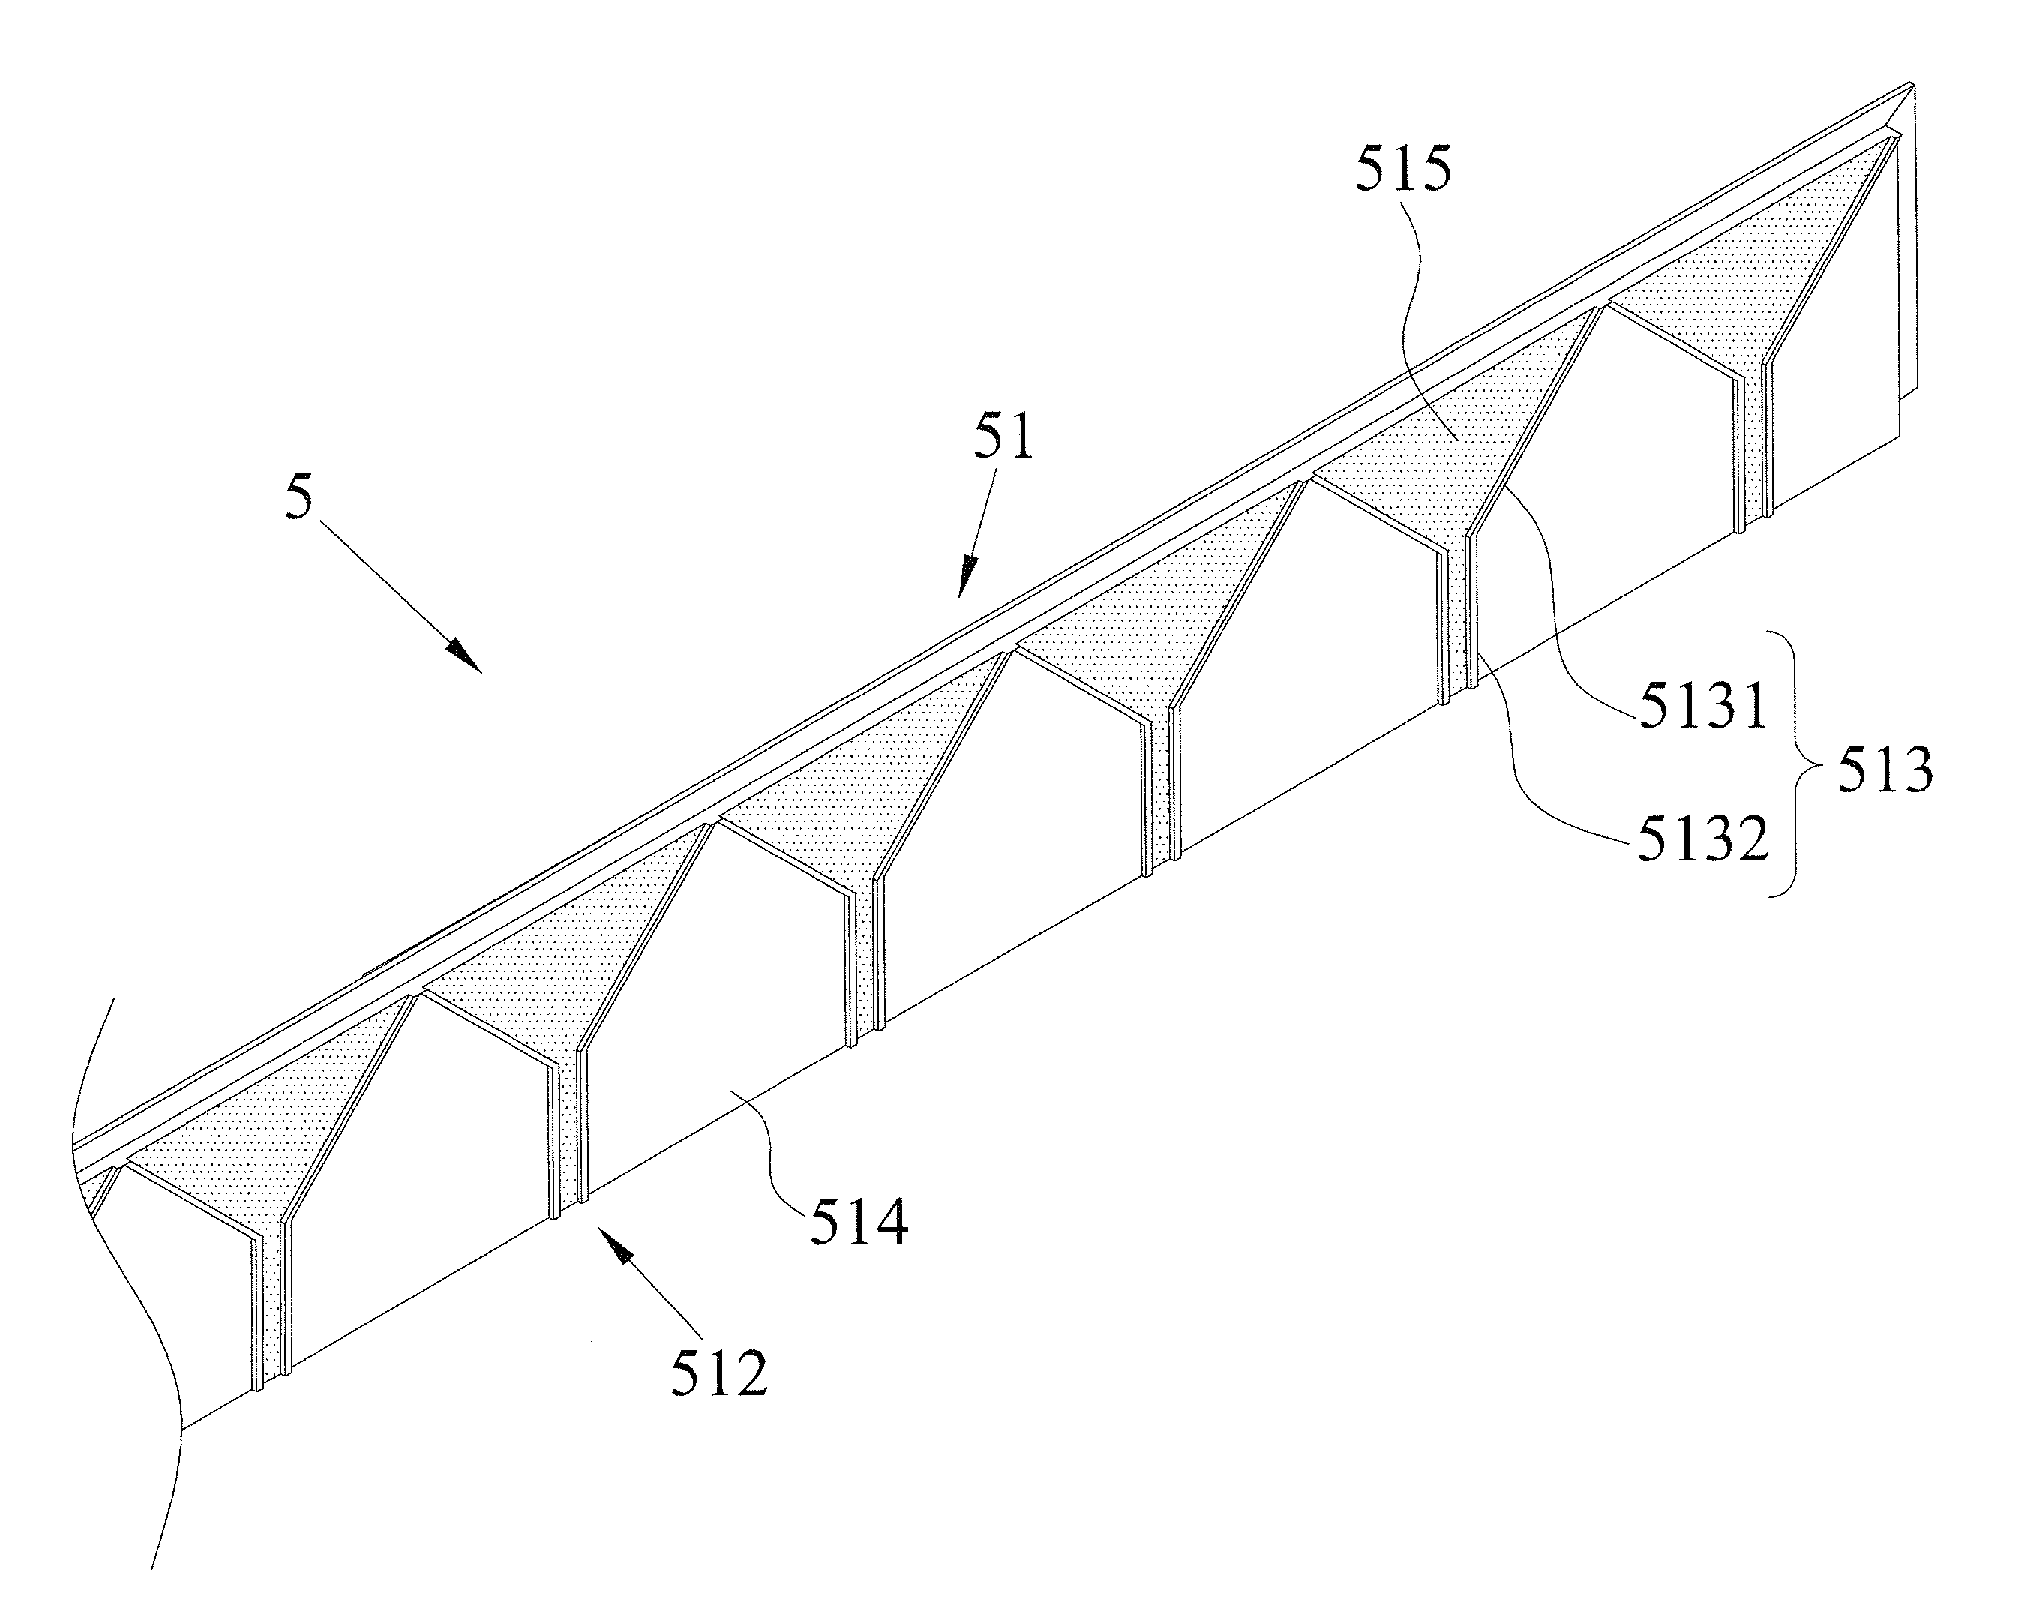 Foam ornament surface enhancing method and exterior wall decorative foam manufactured by the same